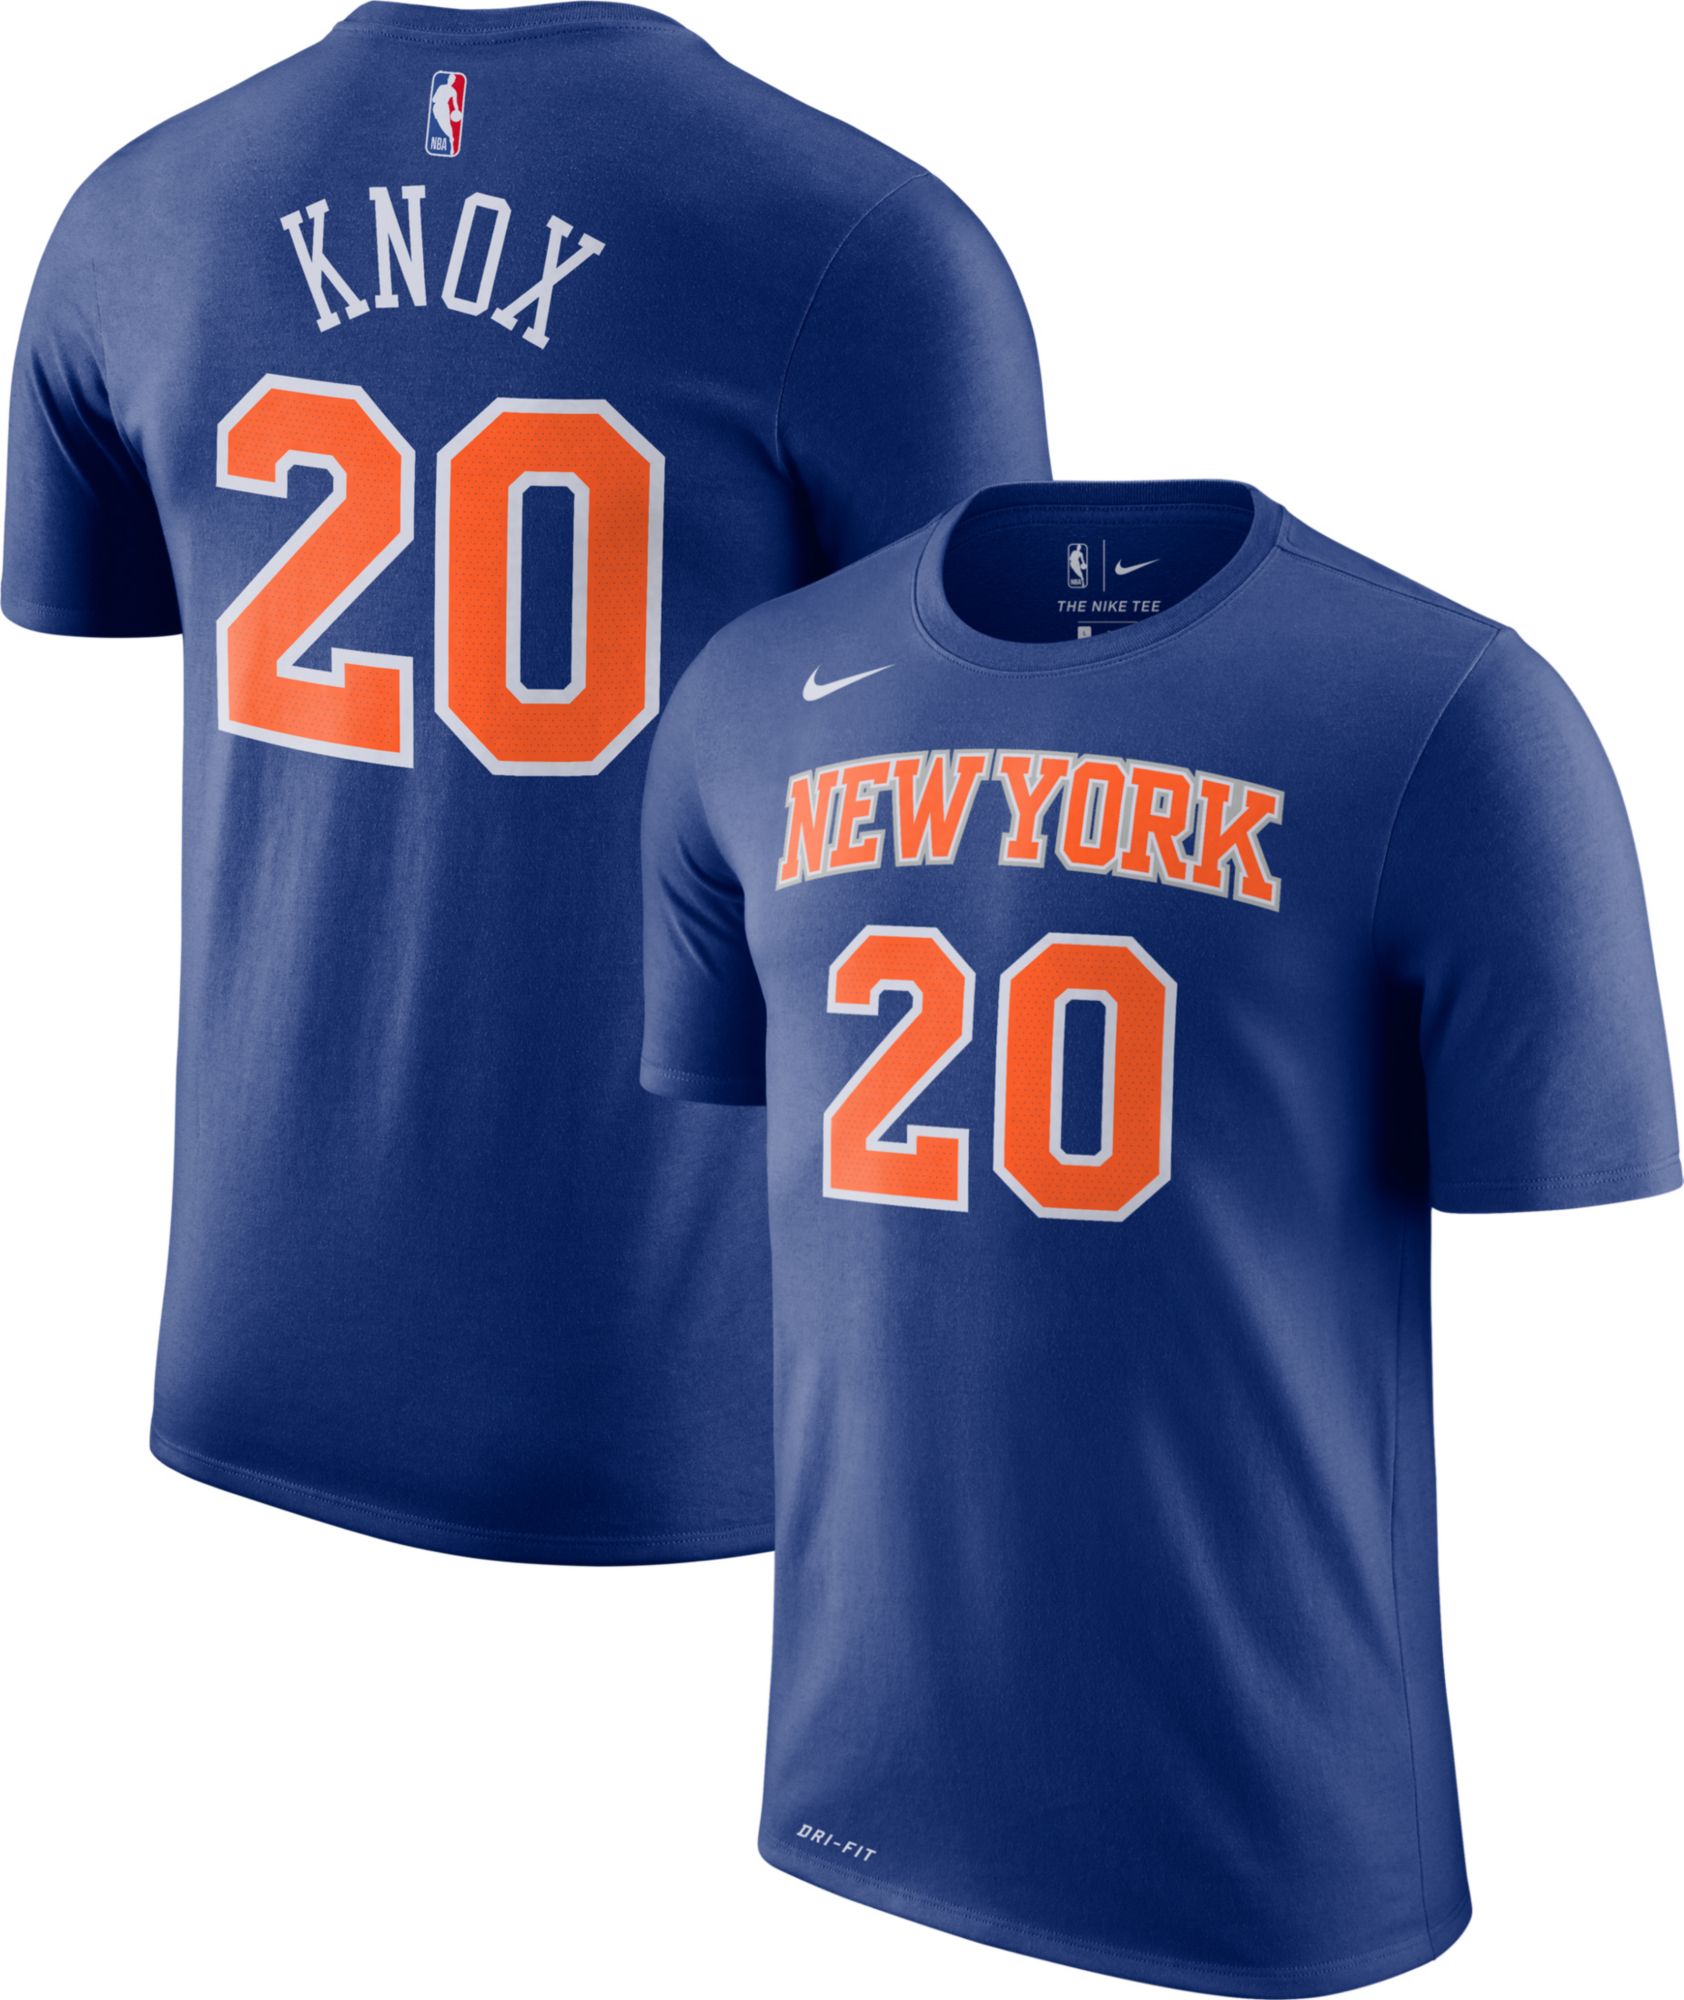 kevin knox jersey youth